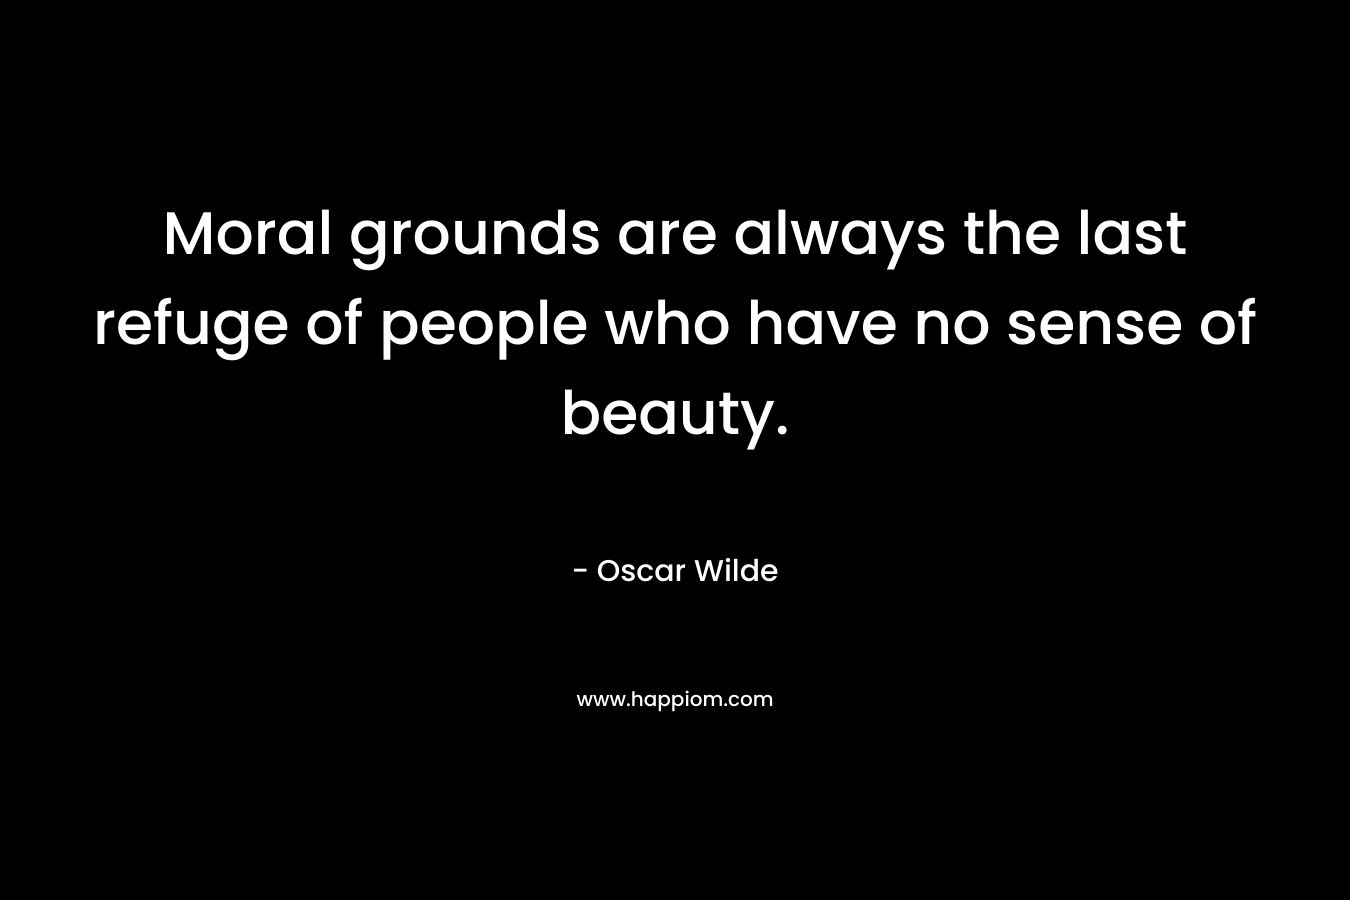 Moral grounds are always the last refuge of people who have no sense of beauty.